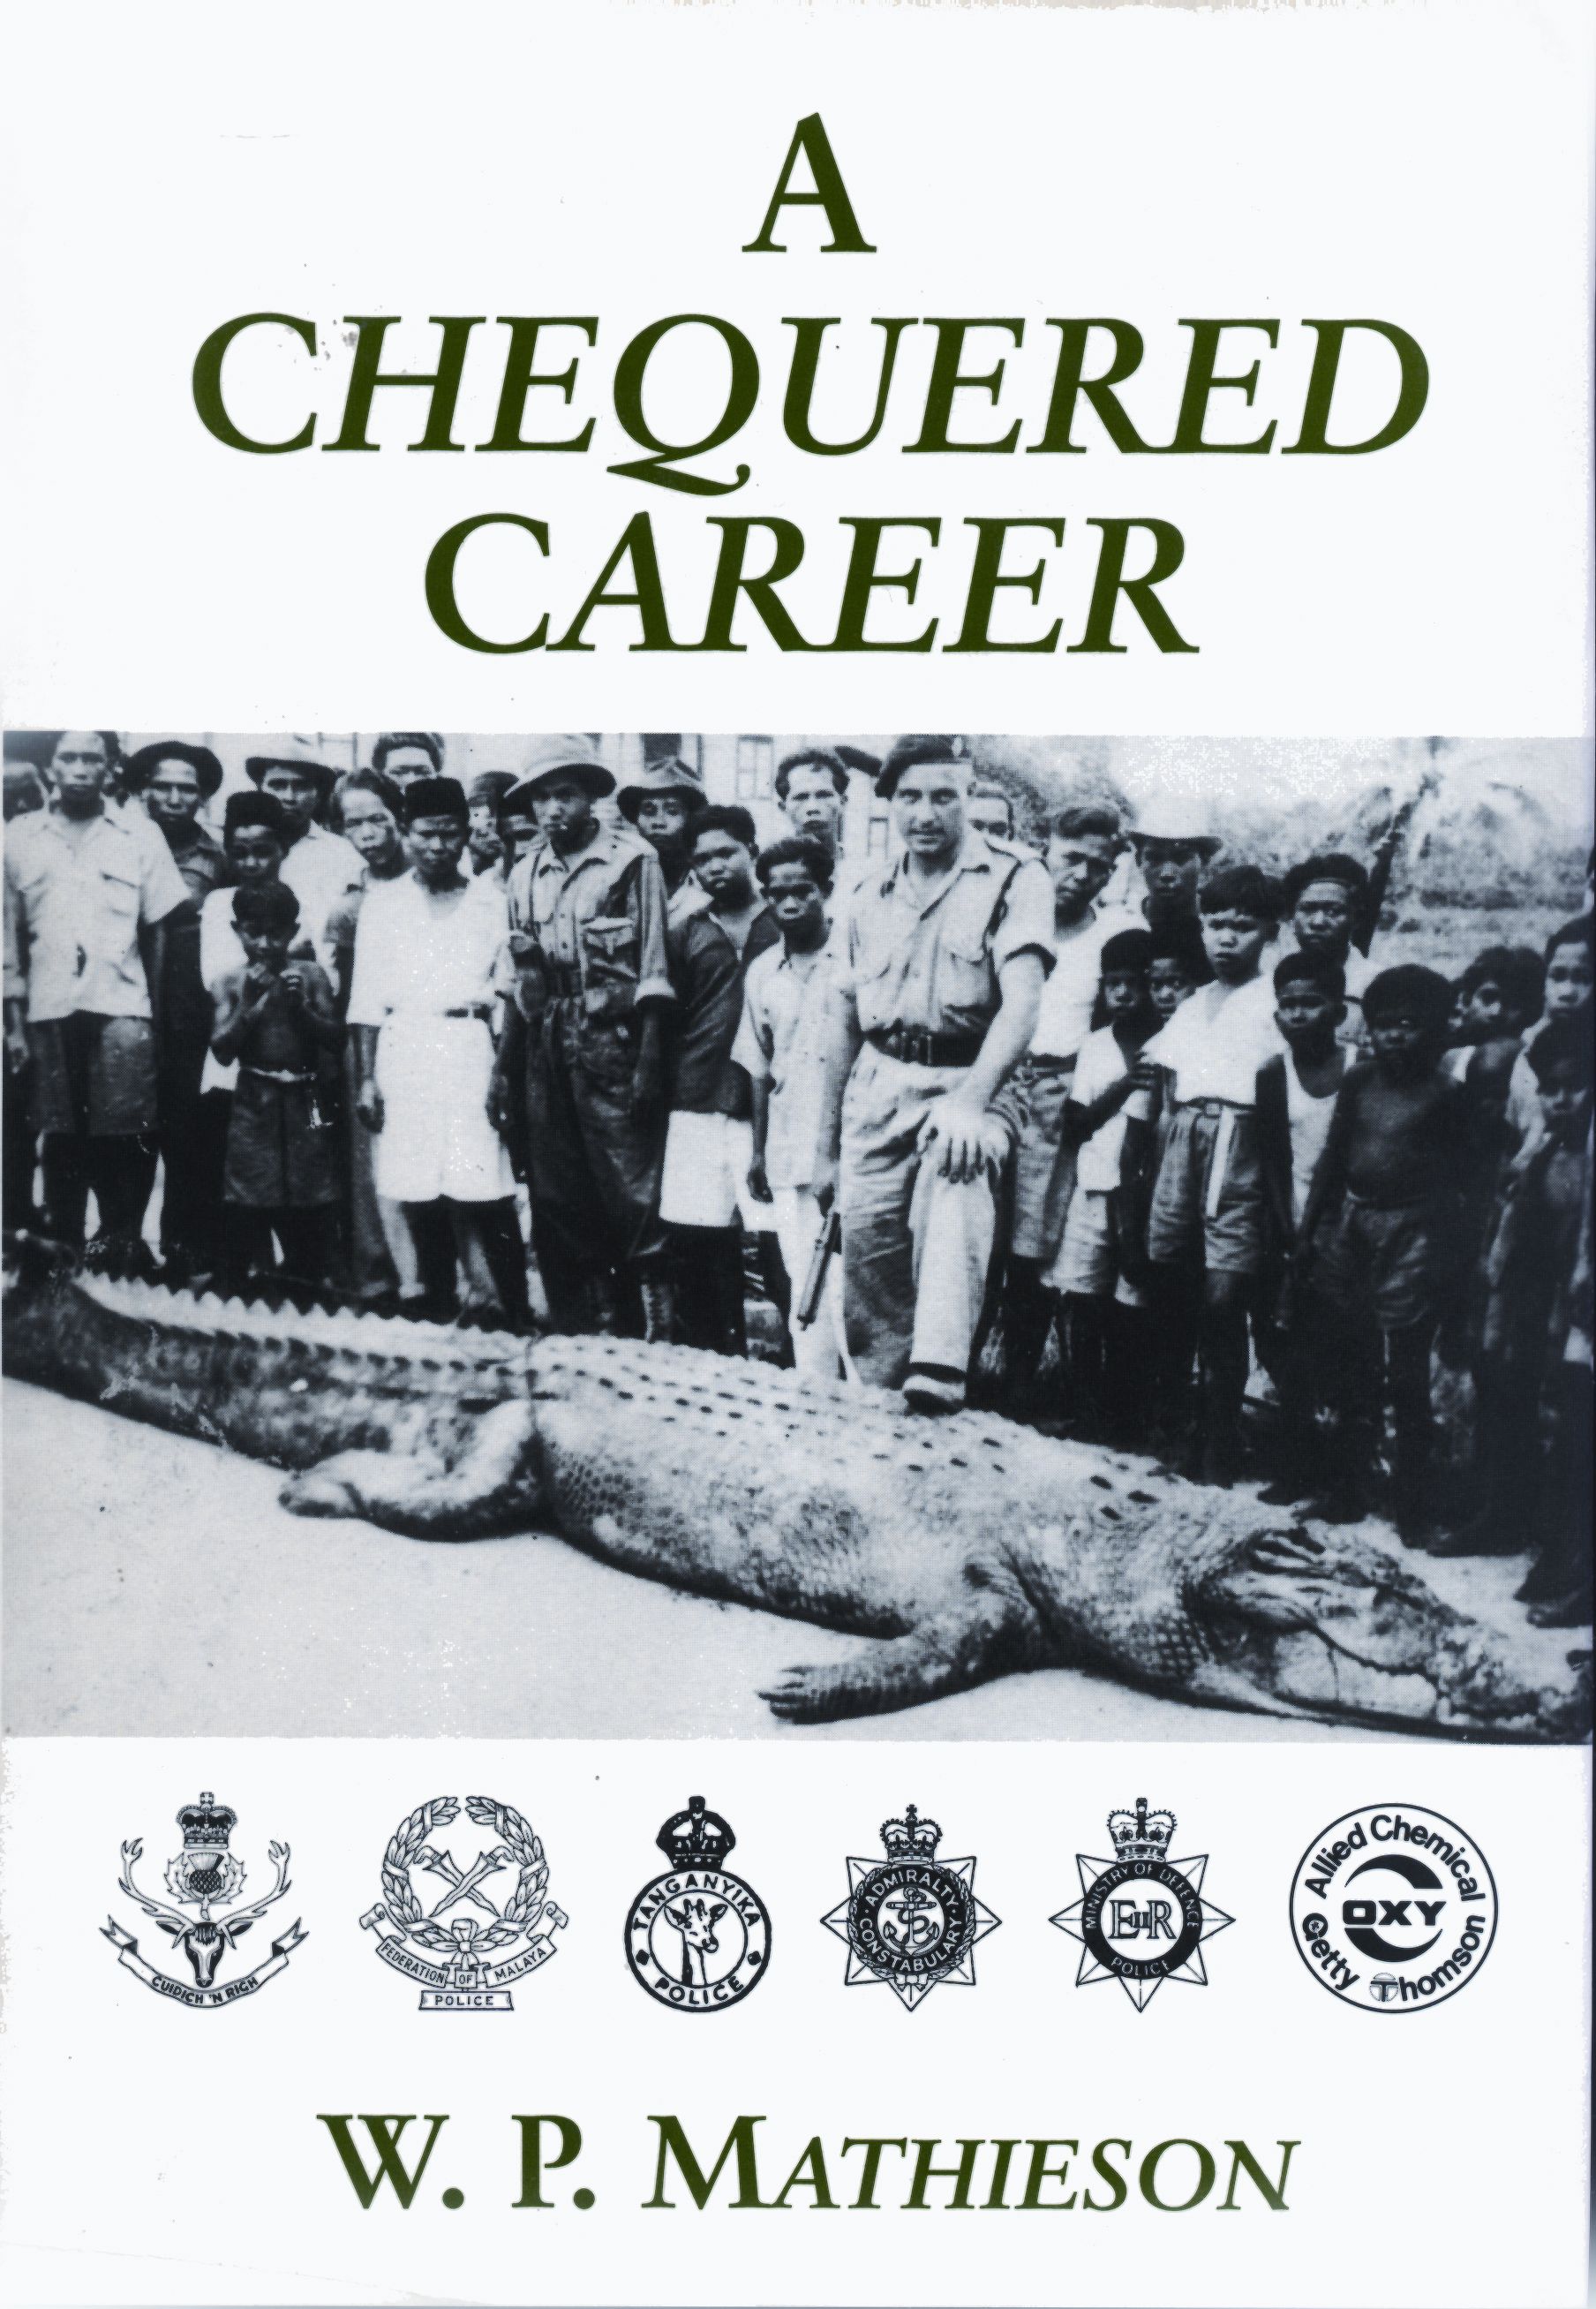 A Chequered Career